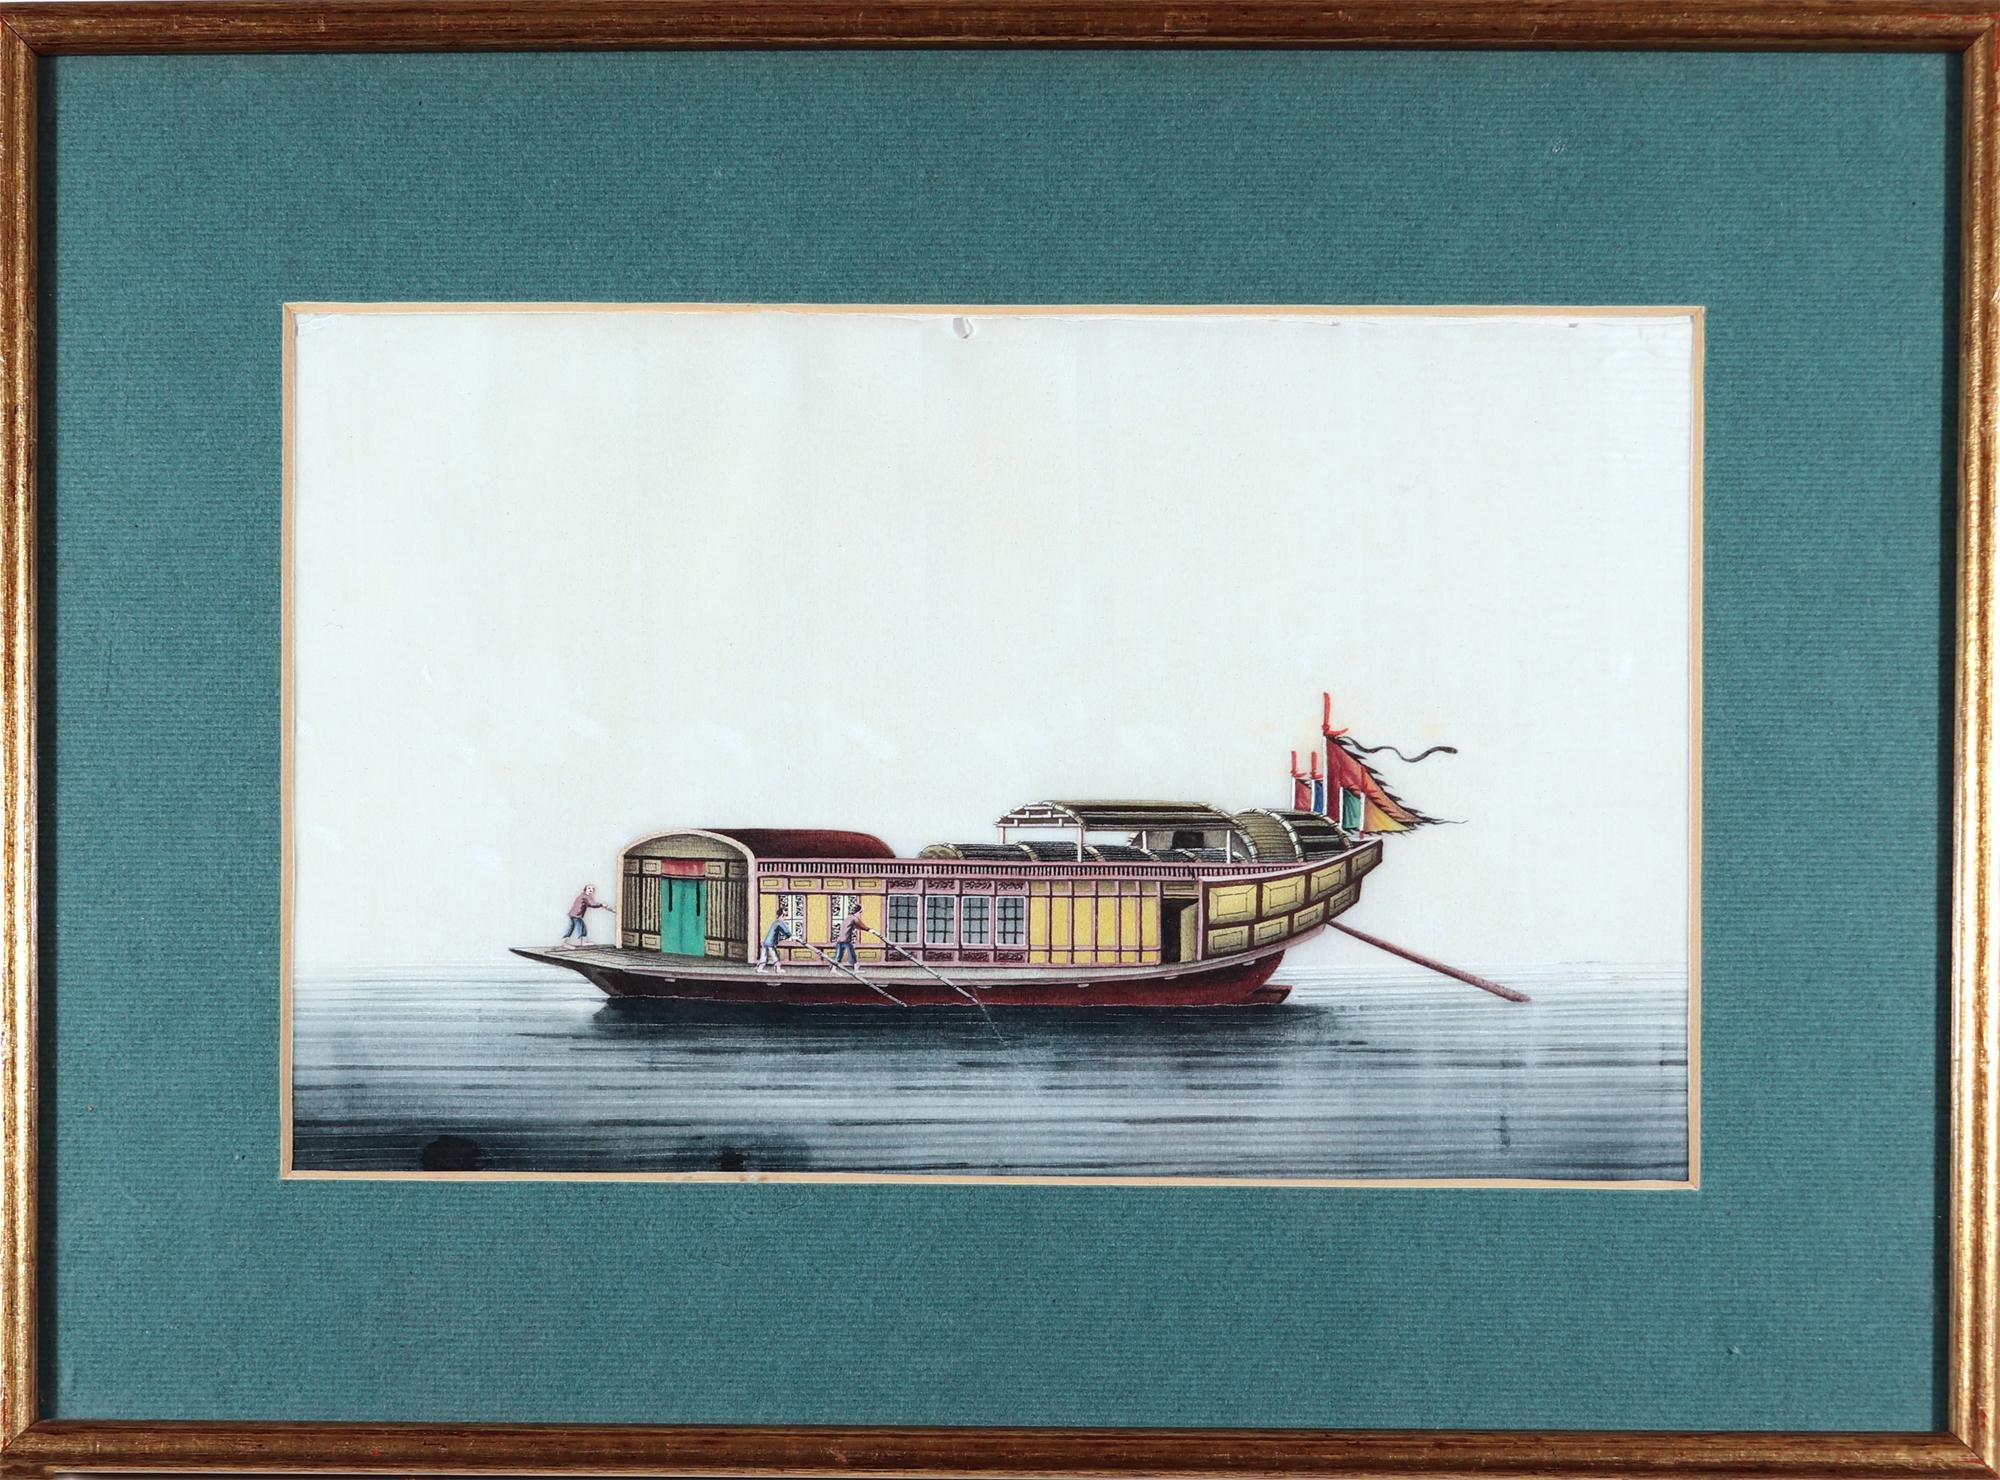 China trade watercolor pictures of junks & sampans,
Set of Five,
Circa 1850

The Chinese watercolor paintings on pith paper each depict a different Chinese ship. The pith paper pictures are mounted within a gilt frame with a wide green